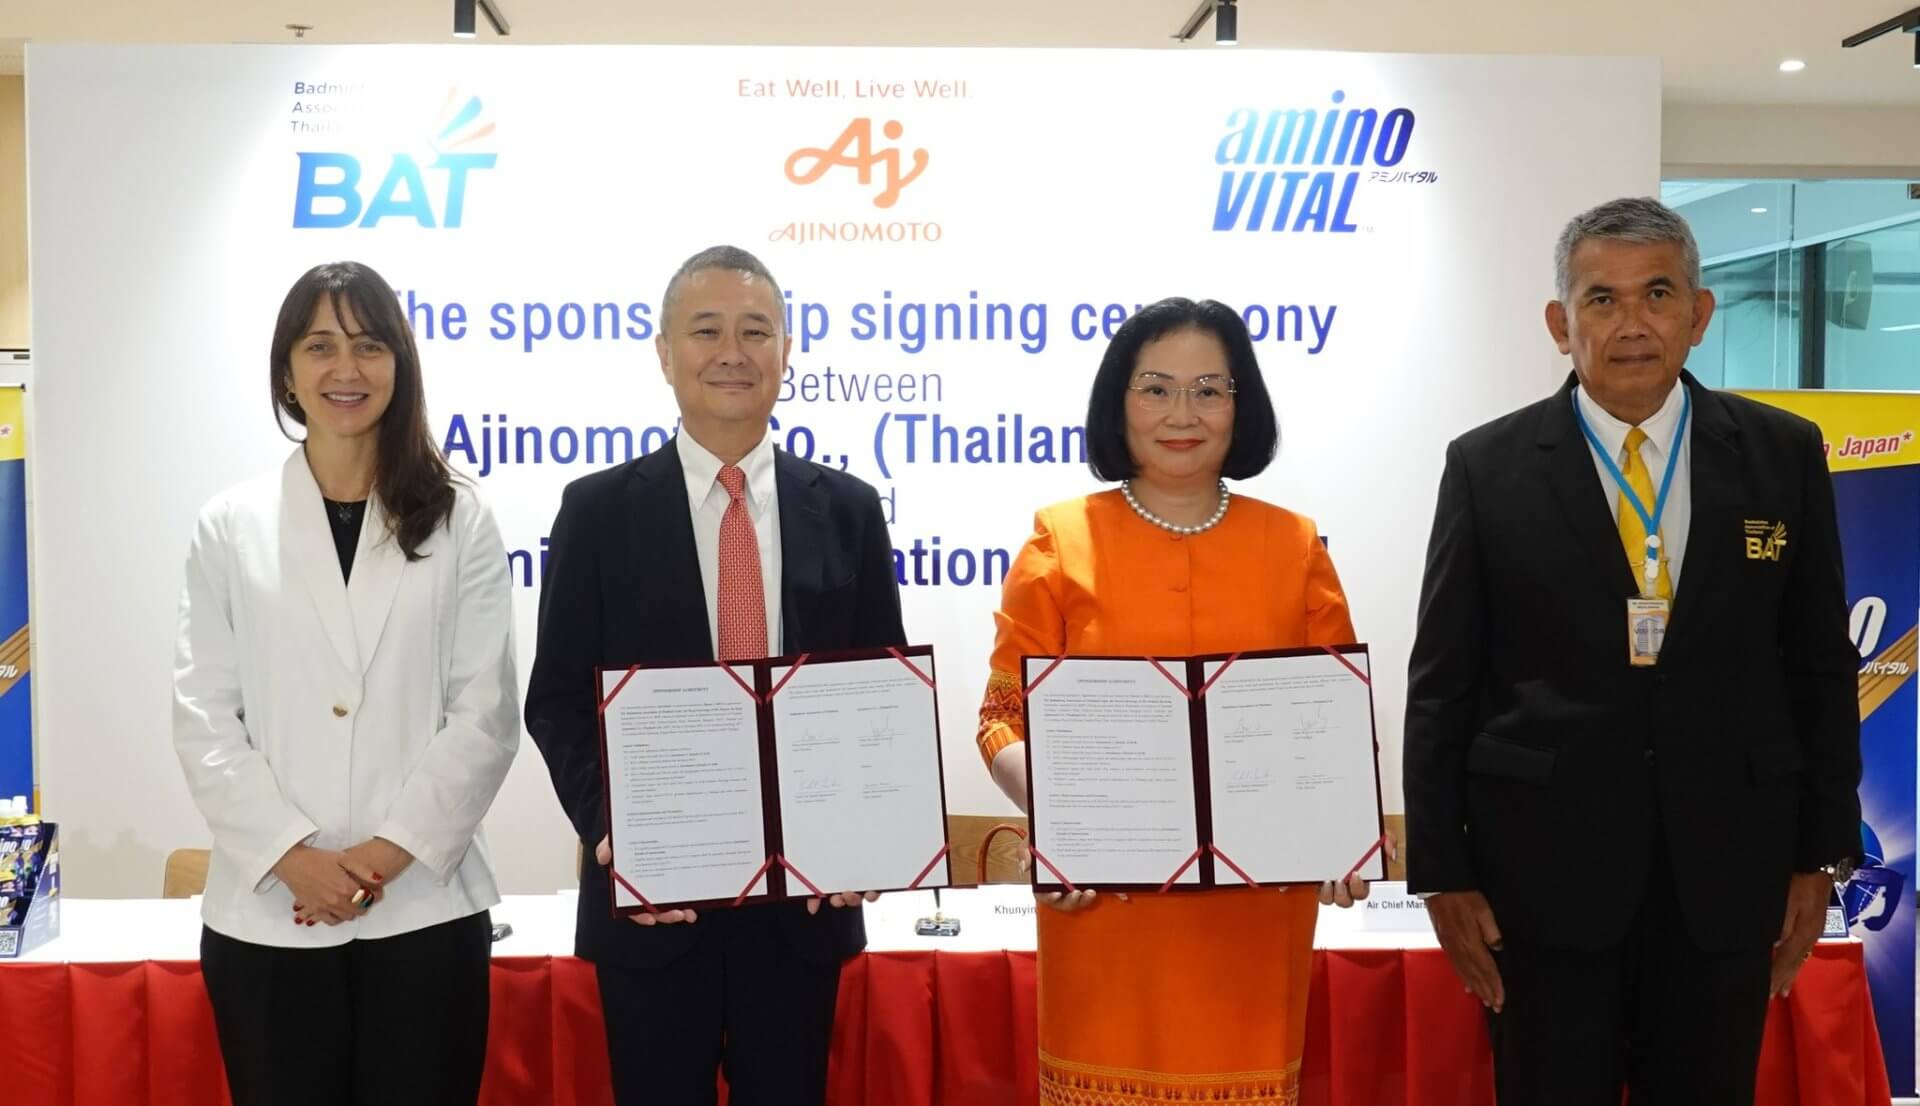 Signing of the sponsorship agreement with the Badminton Association of Thailand